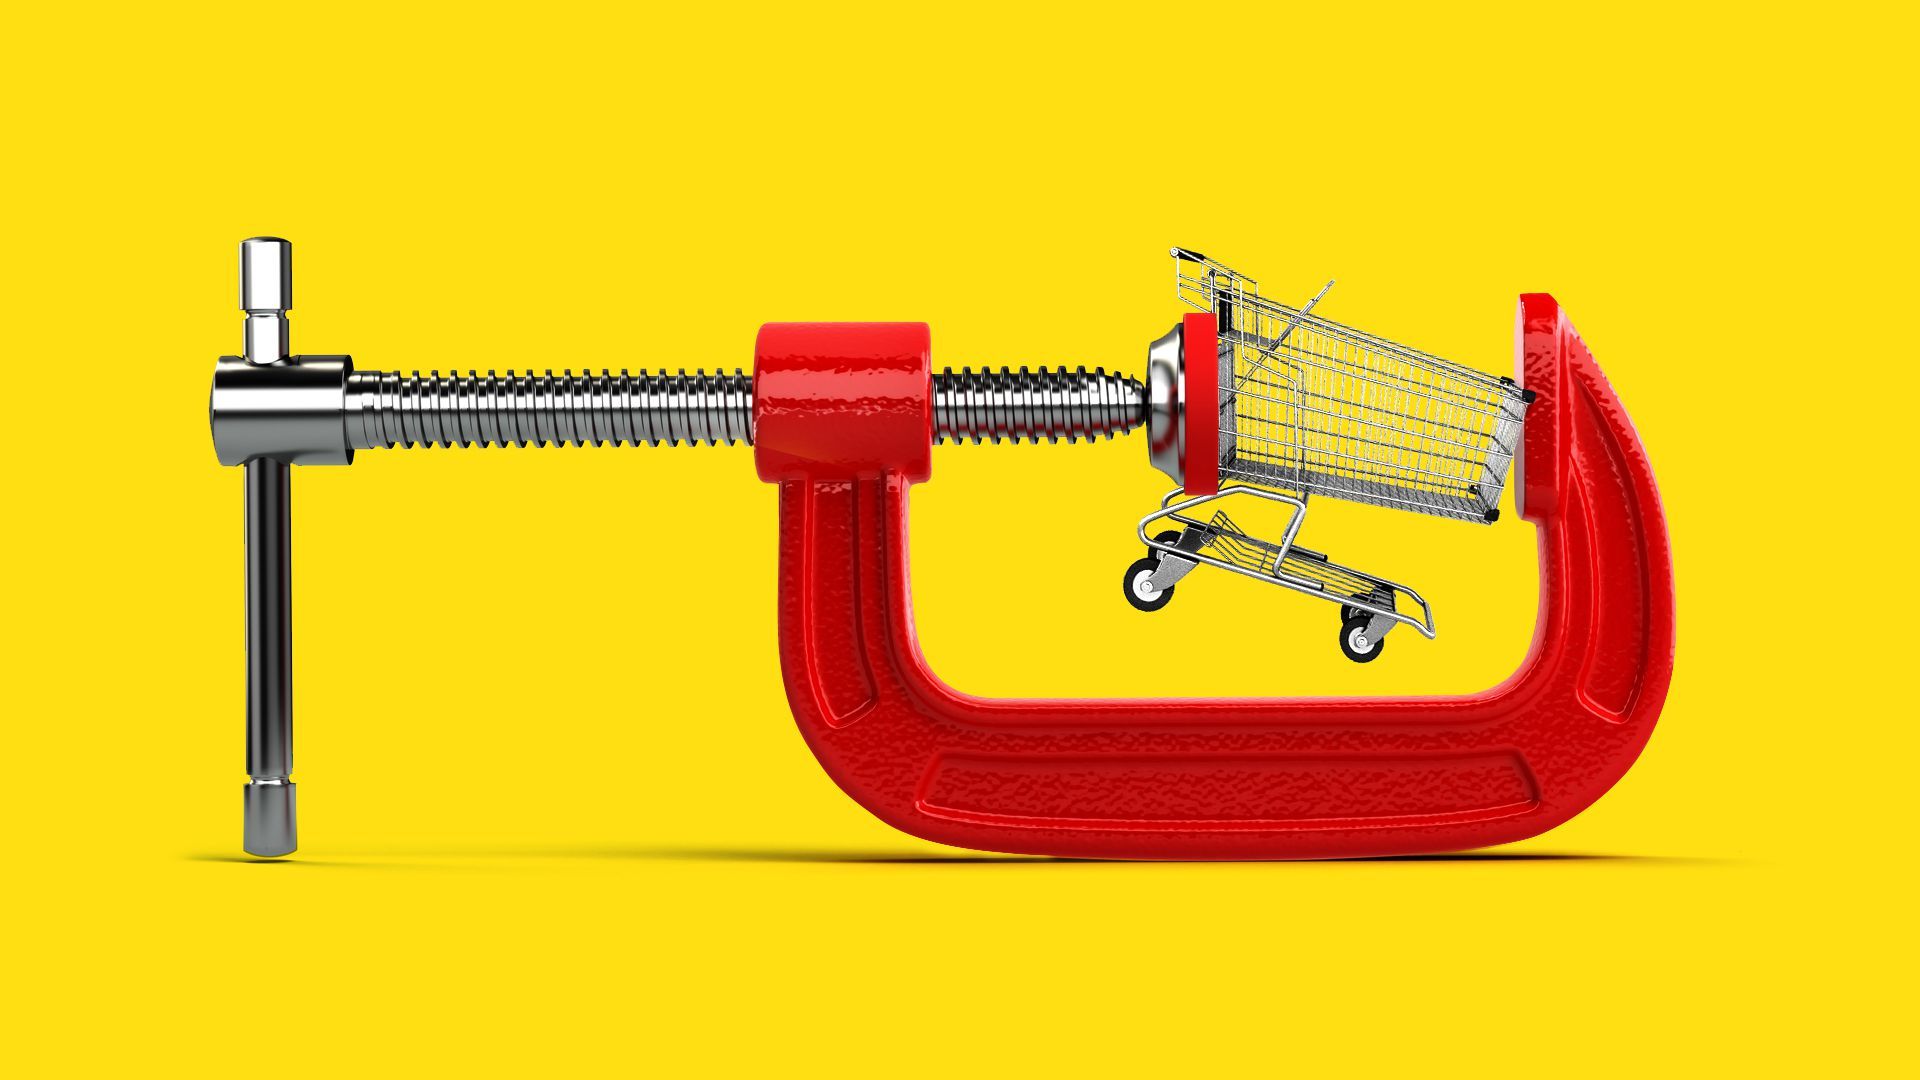 Illustration of a vise grip holding a shopping cart